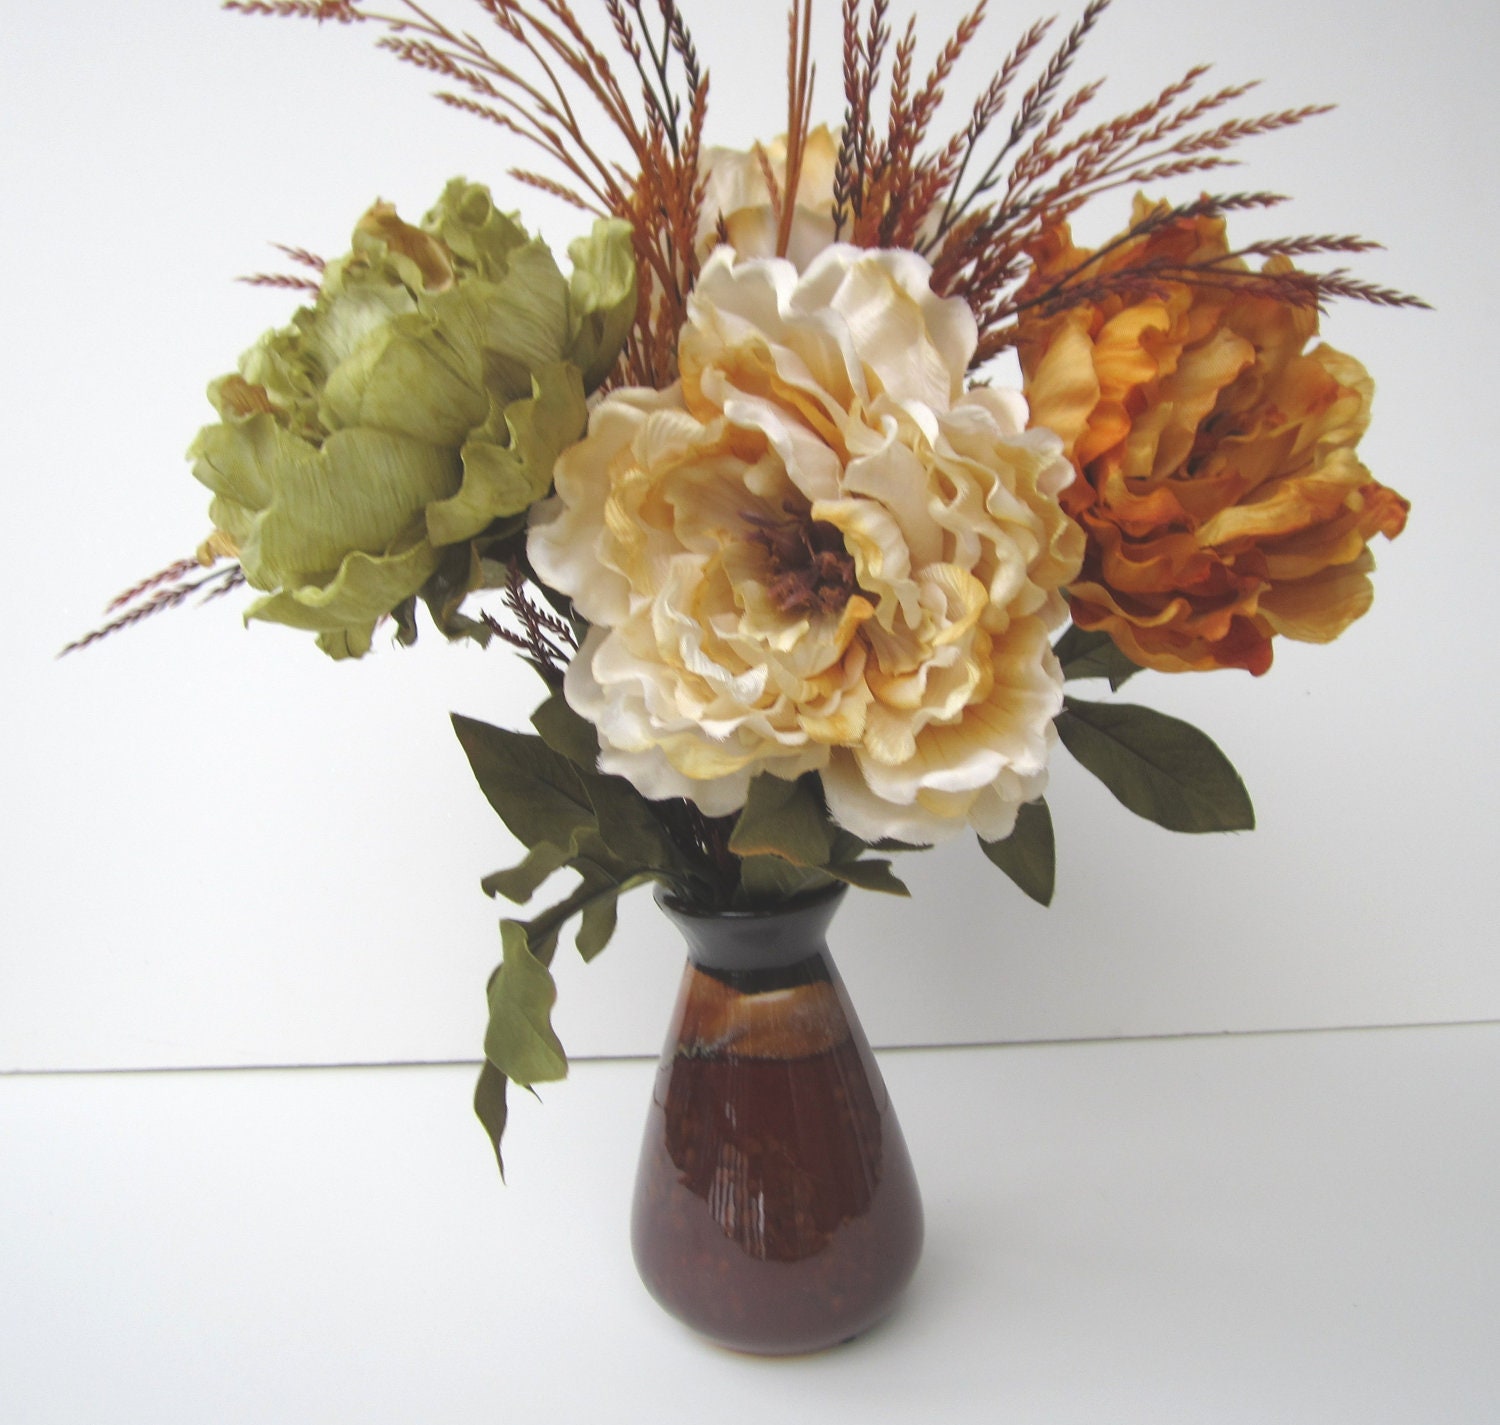 Fall Floral Arrangement In a Ceramic Vase Peonies in Fall Colors - IllusionCreations